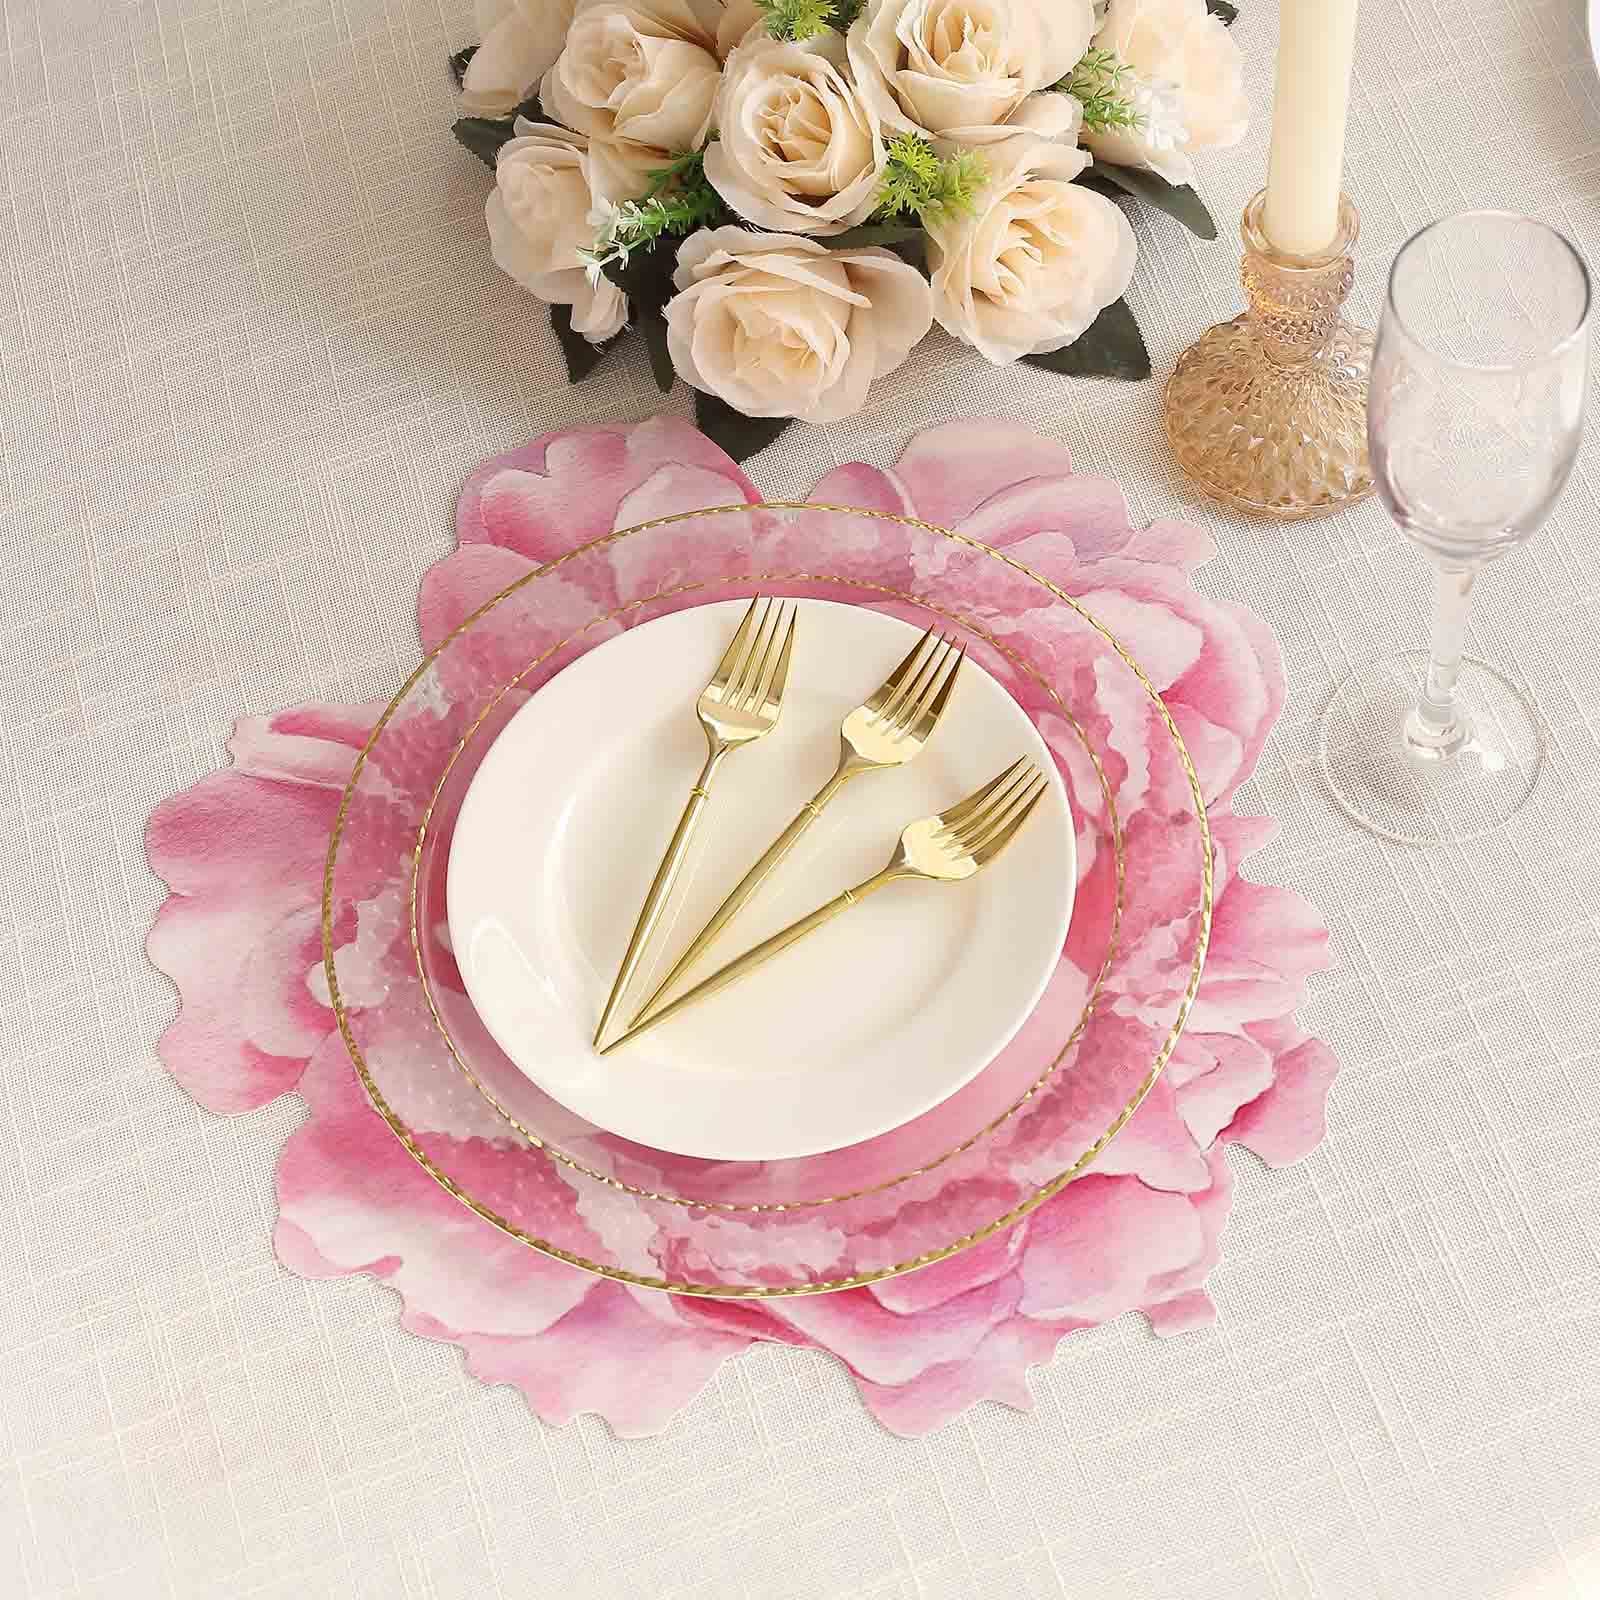 10 Peony Flower Cardboard Paper Placemats - Pink DSP_CHRG_PEO01_PINK